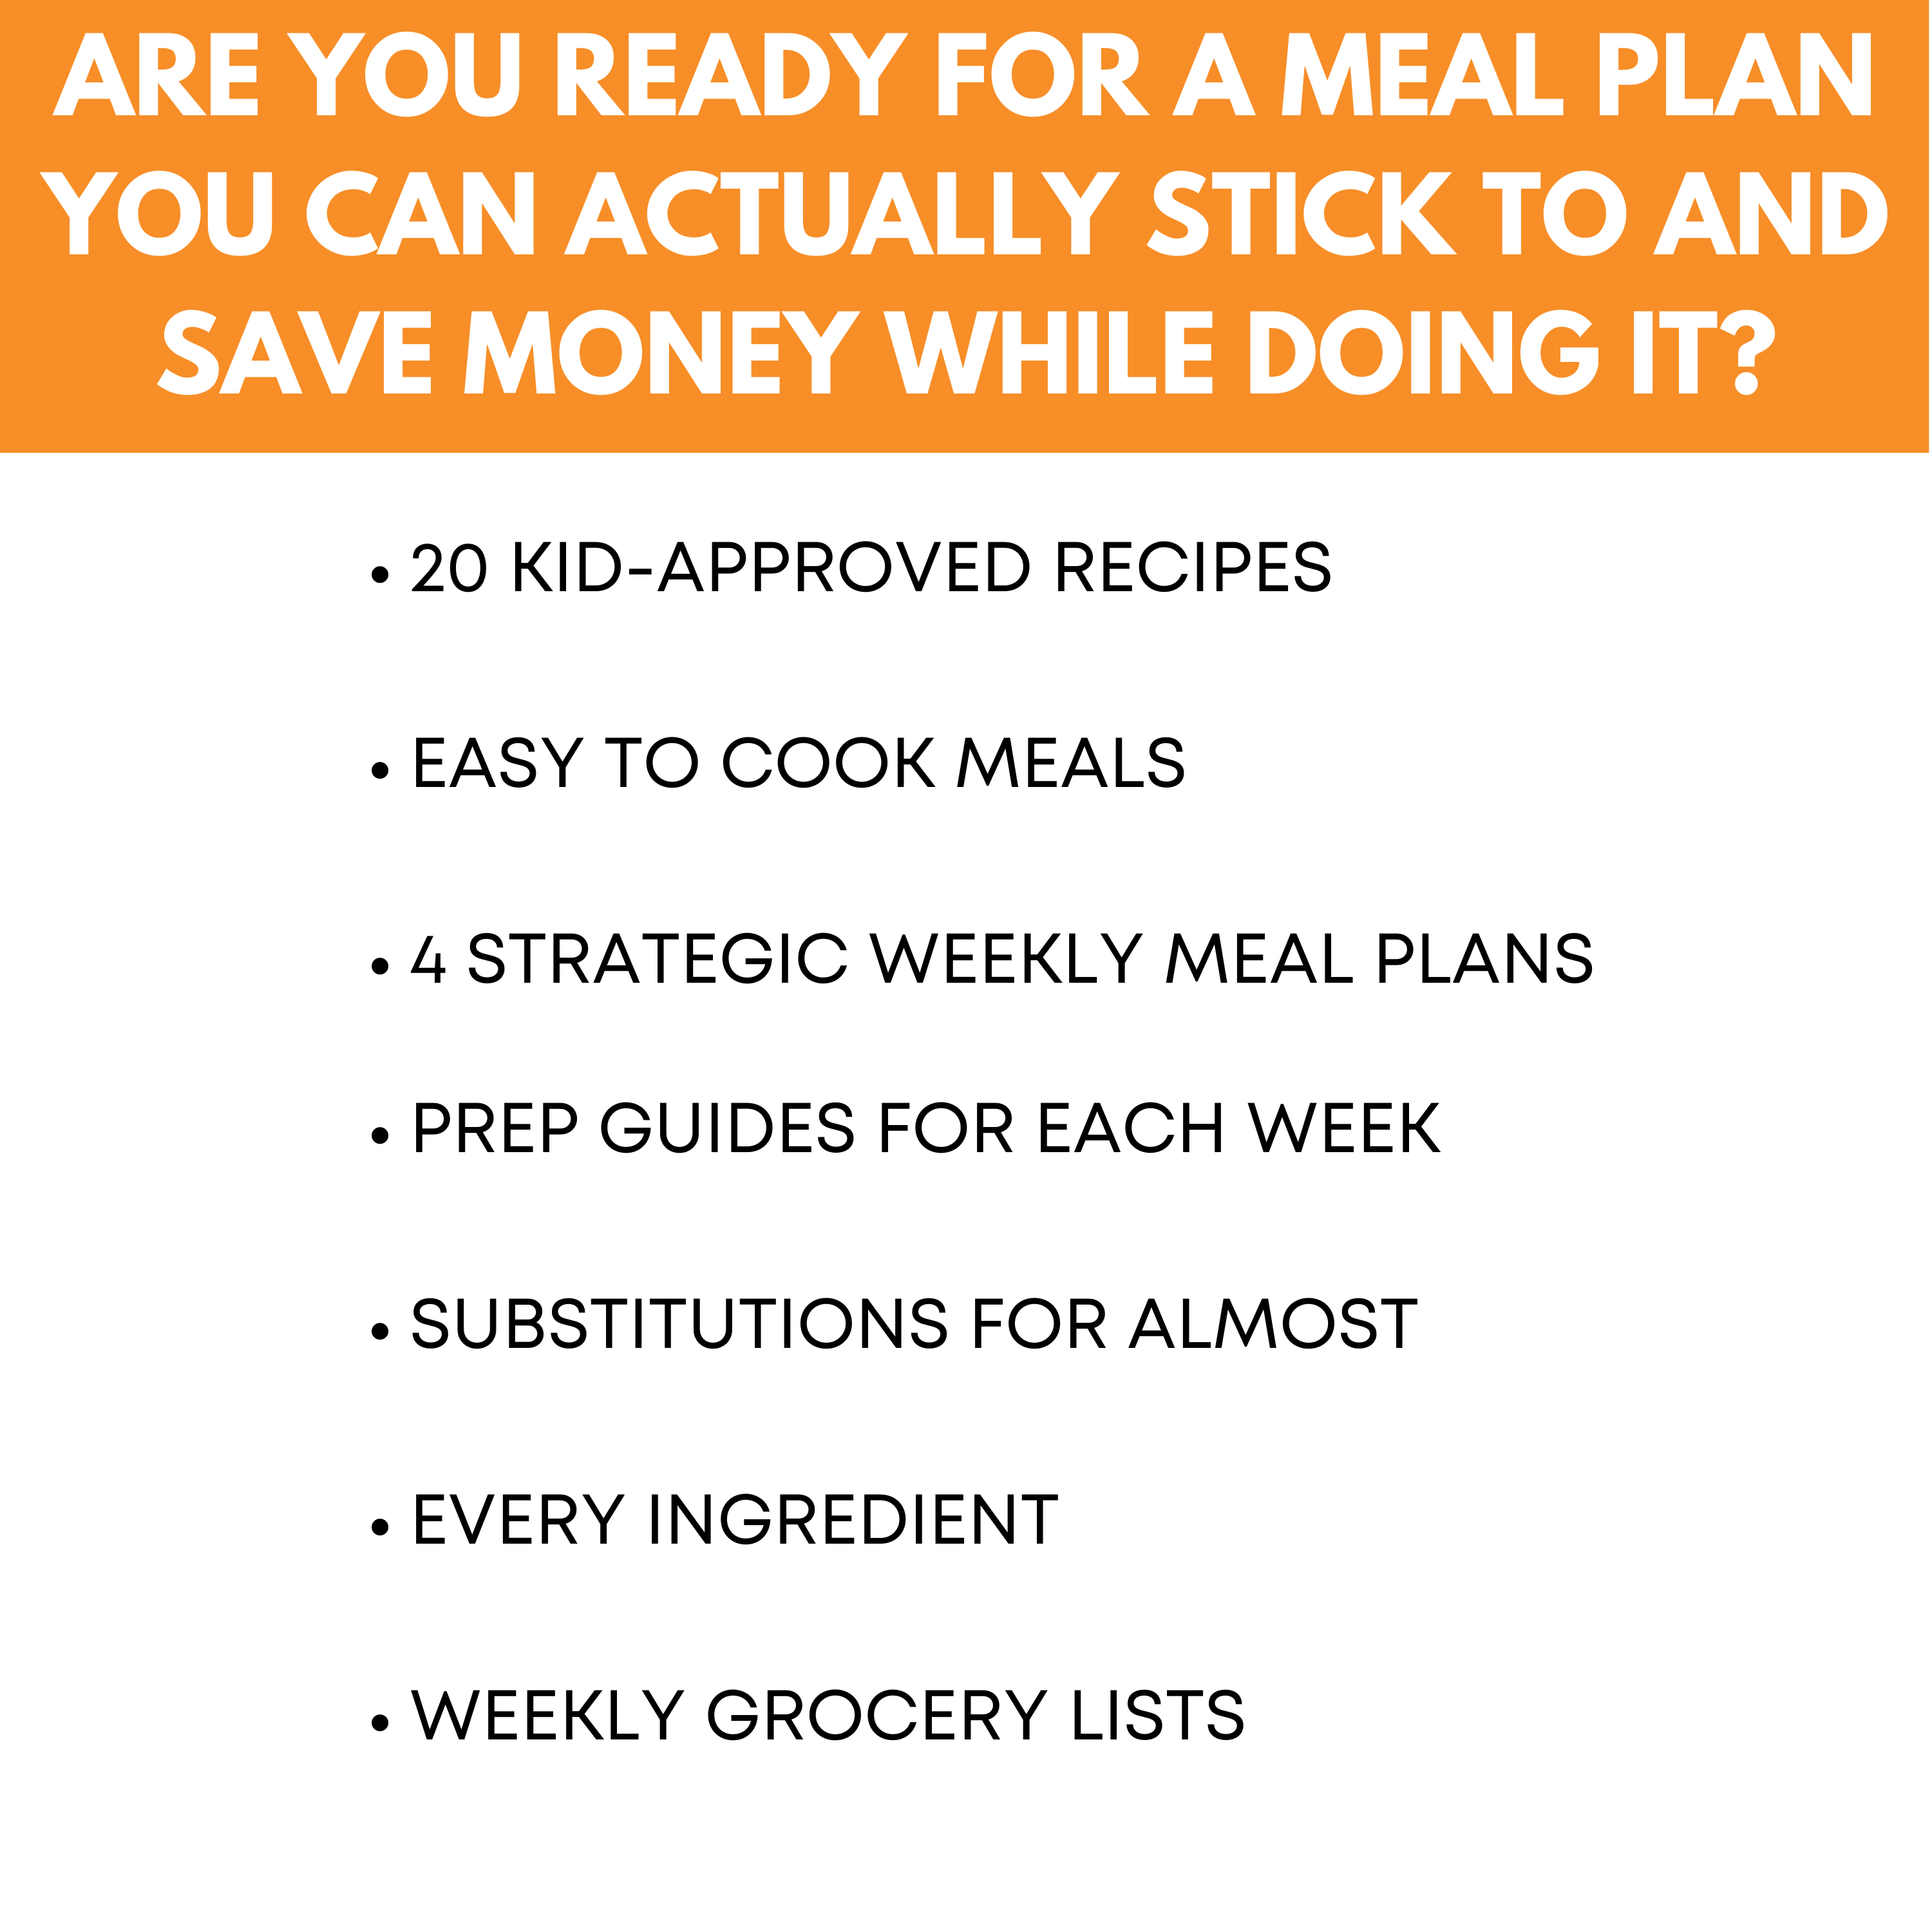 Budget Meal Guide: Pantry Edition